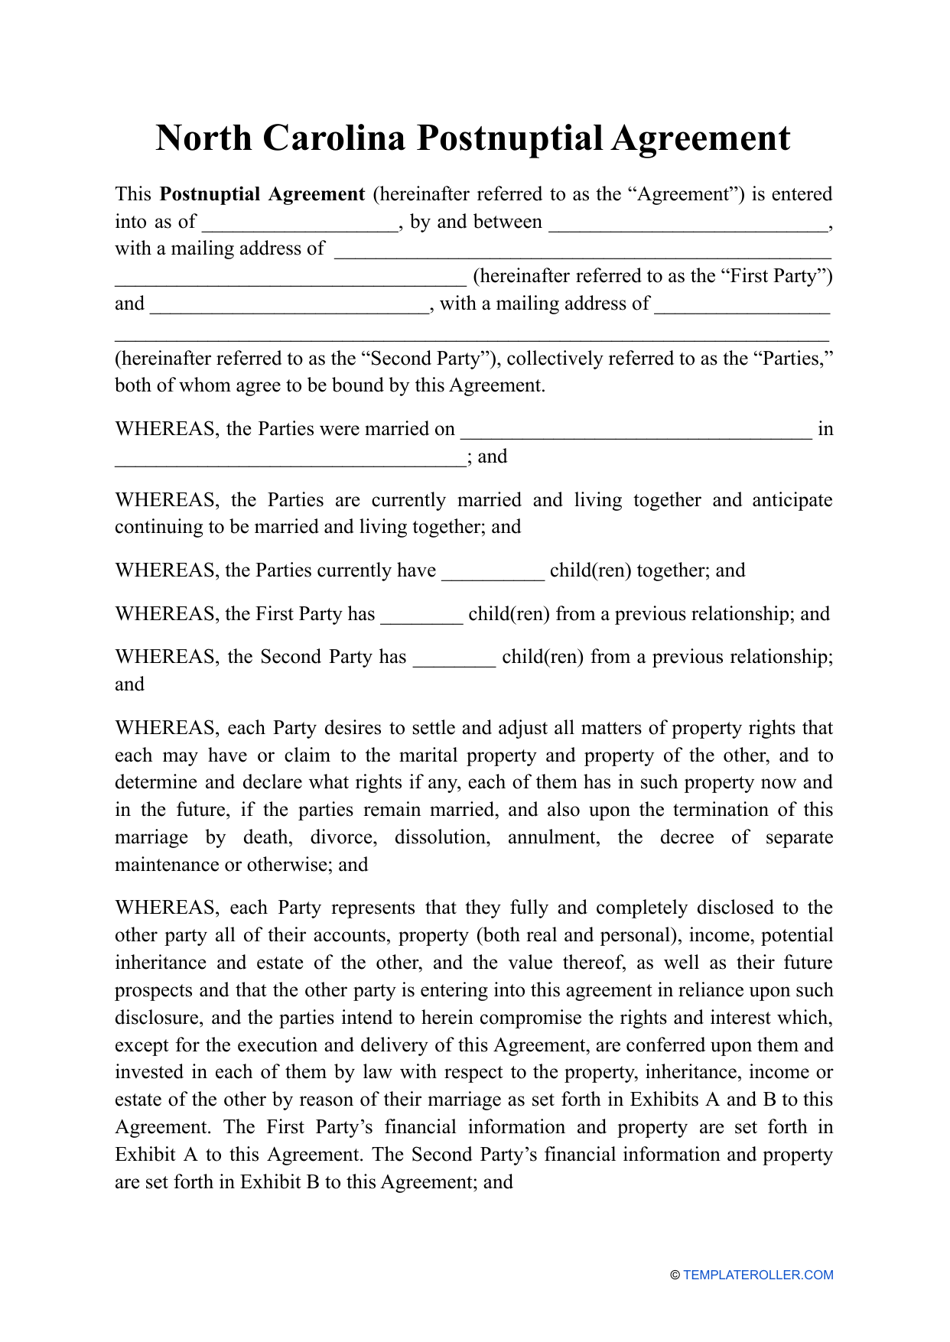 Postnuptial Agreement Template - North Carolina, Page 1